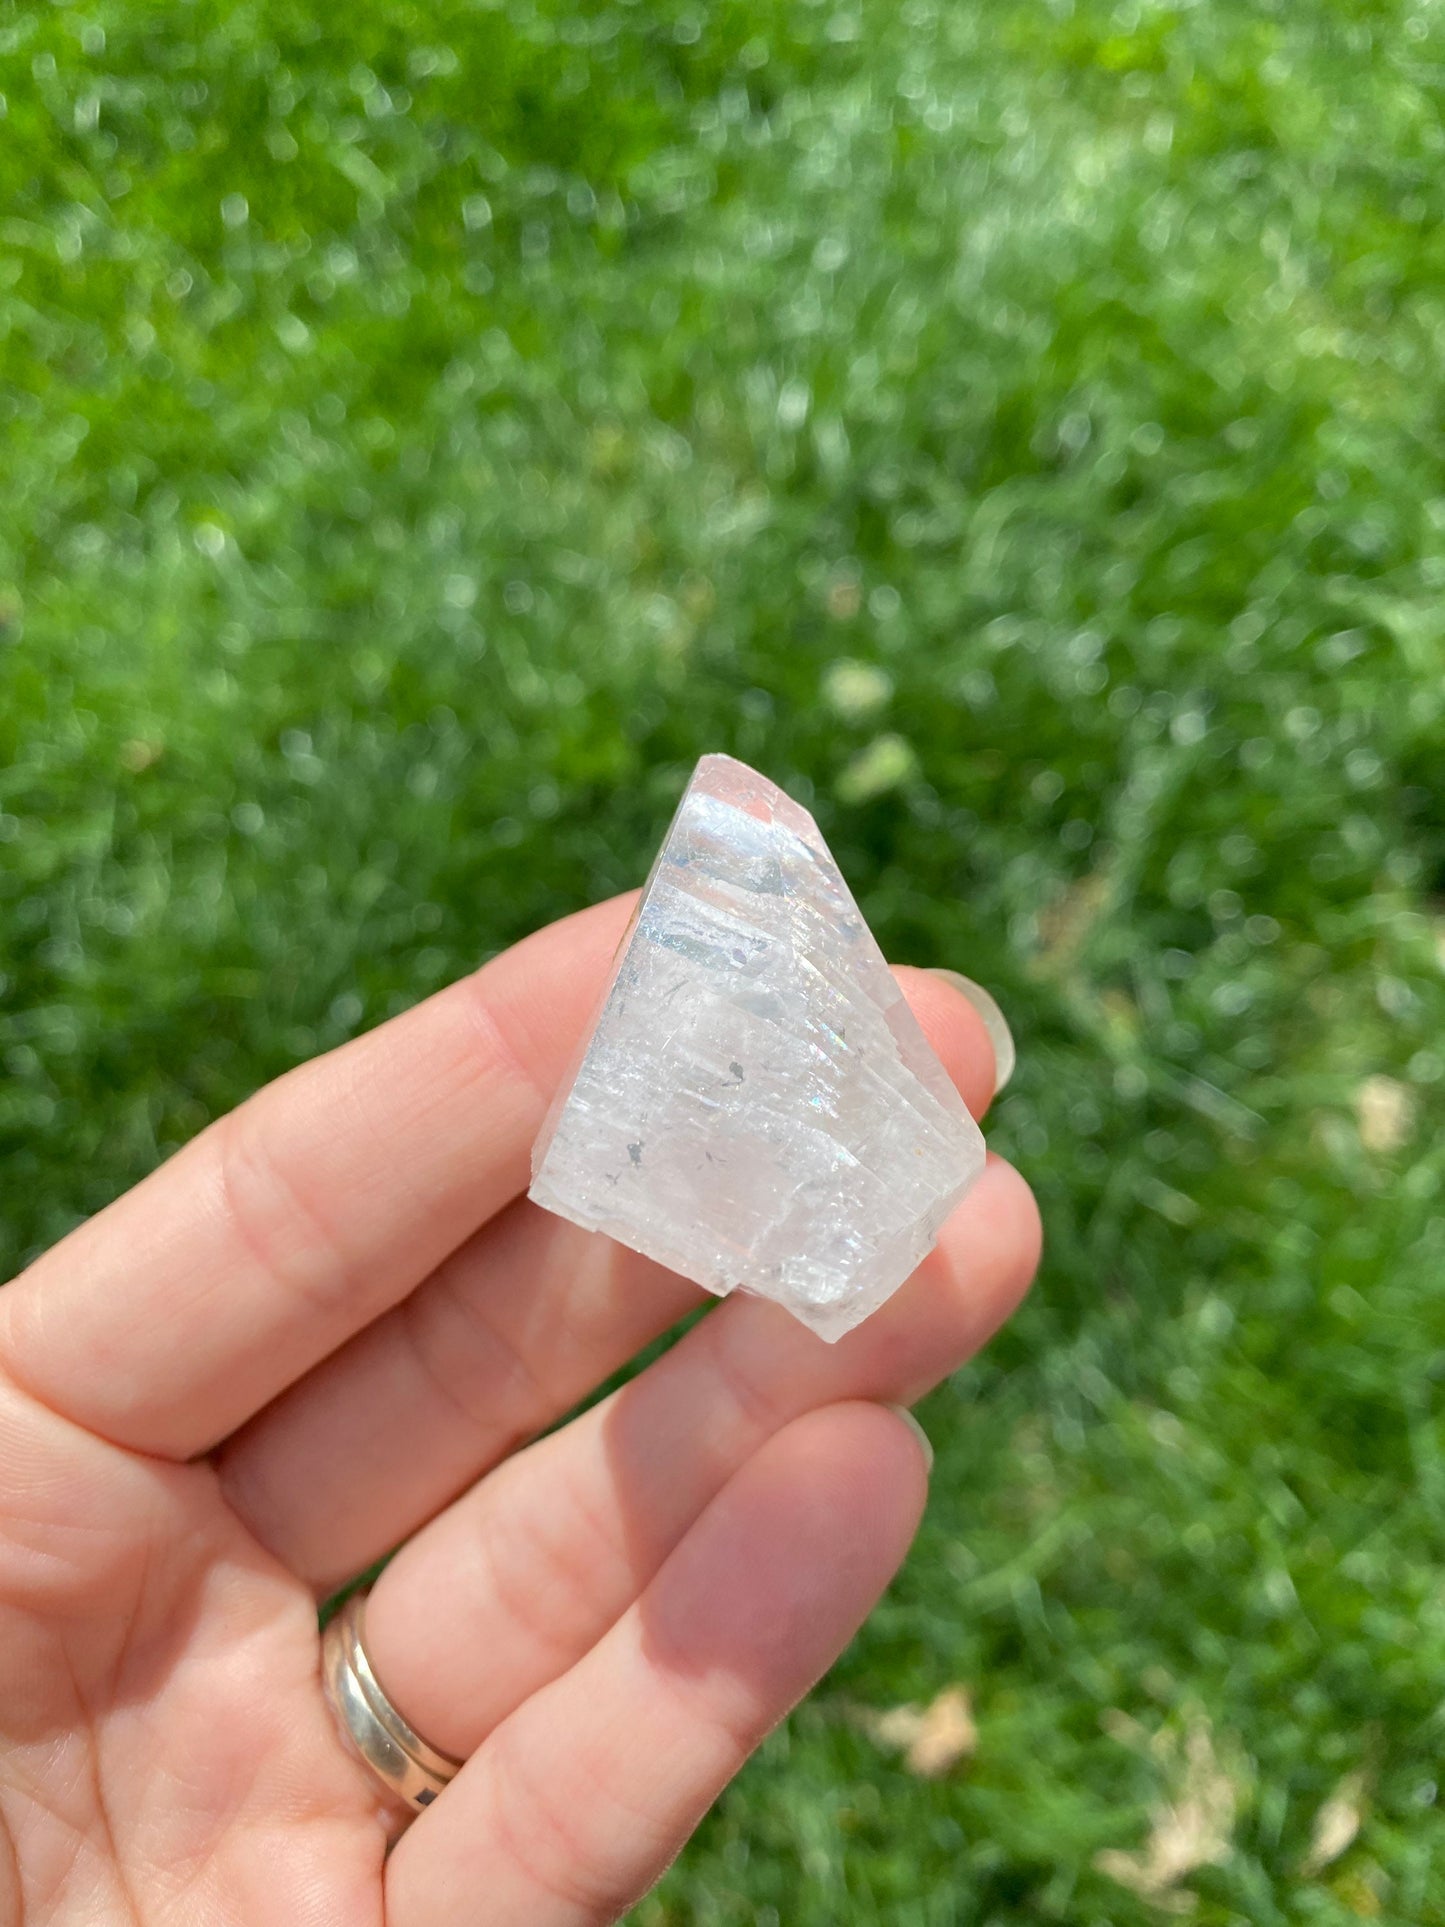 Clear Calcite Crystal Point with lots of Rainbows - Buffalo Iowa - Linwood Mine - Rock Shop